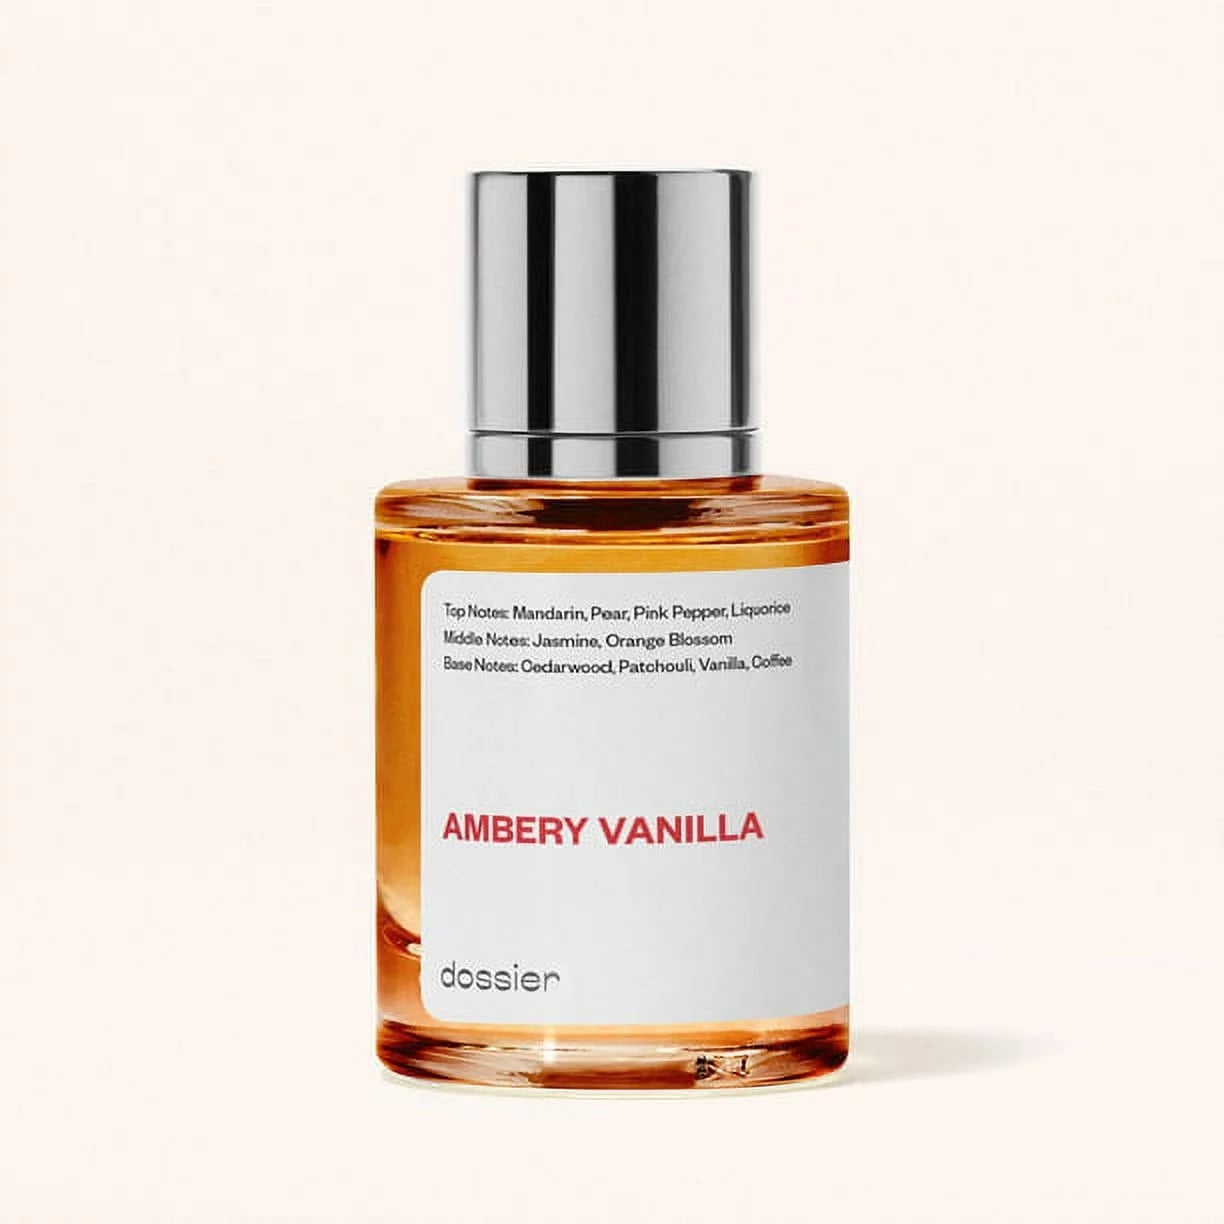 <p><a href="https://www.walmart.com/ip/Ambery-Vanilla-Inspired-By-Ysl-S-Black-Opium-Eau-De-Parfum-Size-50Ml-1-7Oz/572638052">BUY NOW</a></p><p>$29</p><p><a href="https://www.walmart.com/ip/Ambery-Vanilla-Inspired-By-Ysl-S-Black-Opium-Eau-De-Parfum-Size-50Ml-1-7Oz/572638052" class="ga-track"><strong>Dossier Ambery Vanilla Eau de Parfum</strong></a> ($29)</p> <p>Dossier's spicy scent is similar to the Black Opium perfume - minus the designer price tag. The notes start bright and gourmand before turning into a warm scent that you'll most likely want to bathe in.</p>